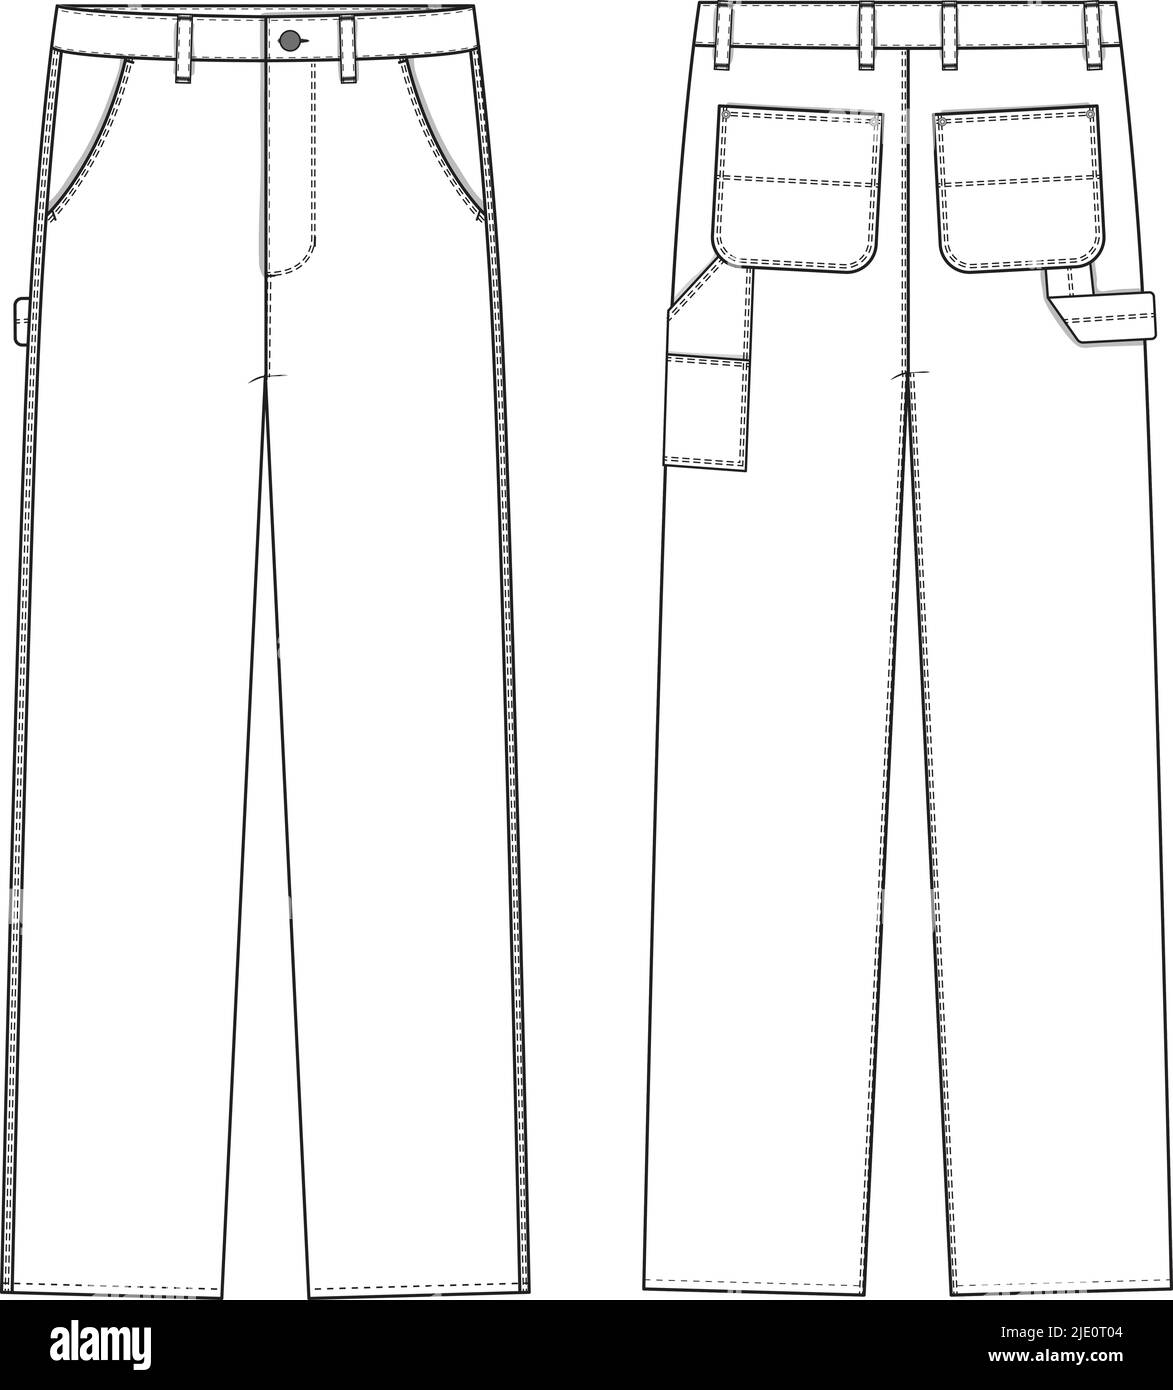 Carpenter Pants Work Skate Straight Leg Flat Technical Drawing Illustration Blank Workwear Streetwear Mock-up Template for Design and Tech Packs CAD. Stock Vector